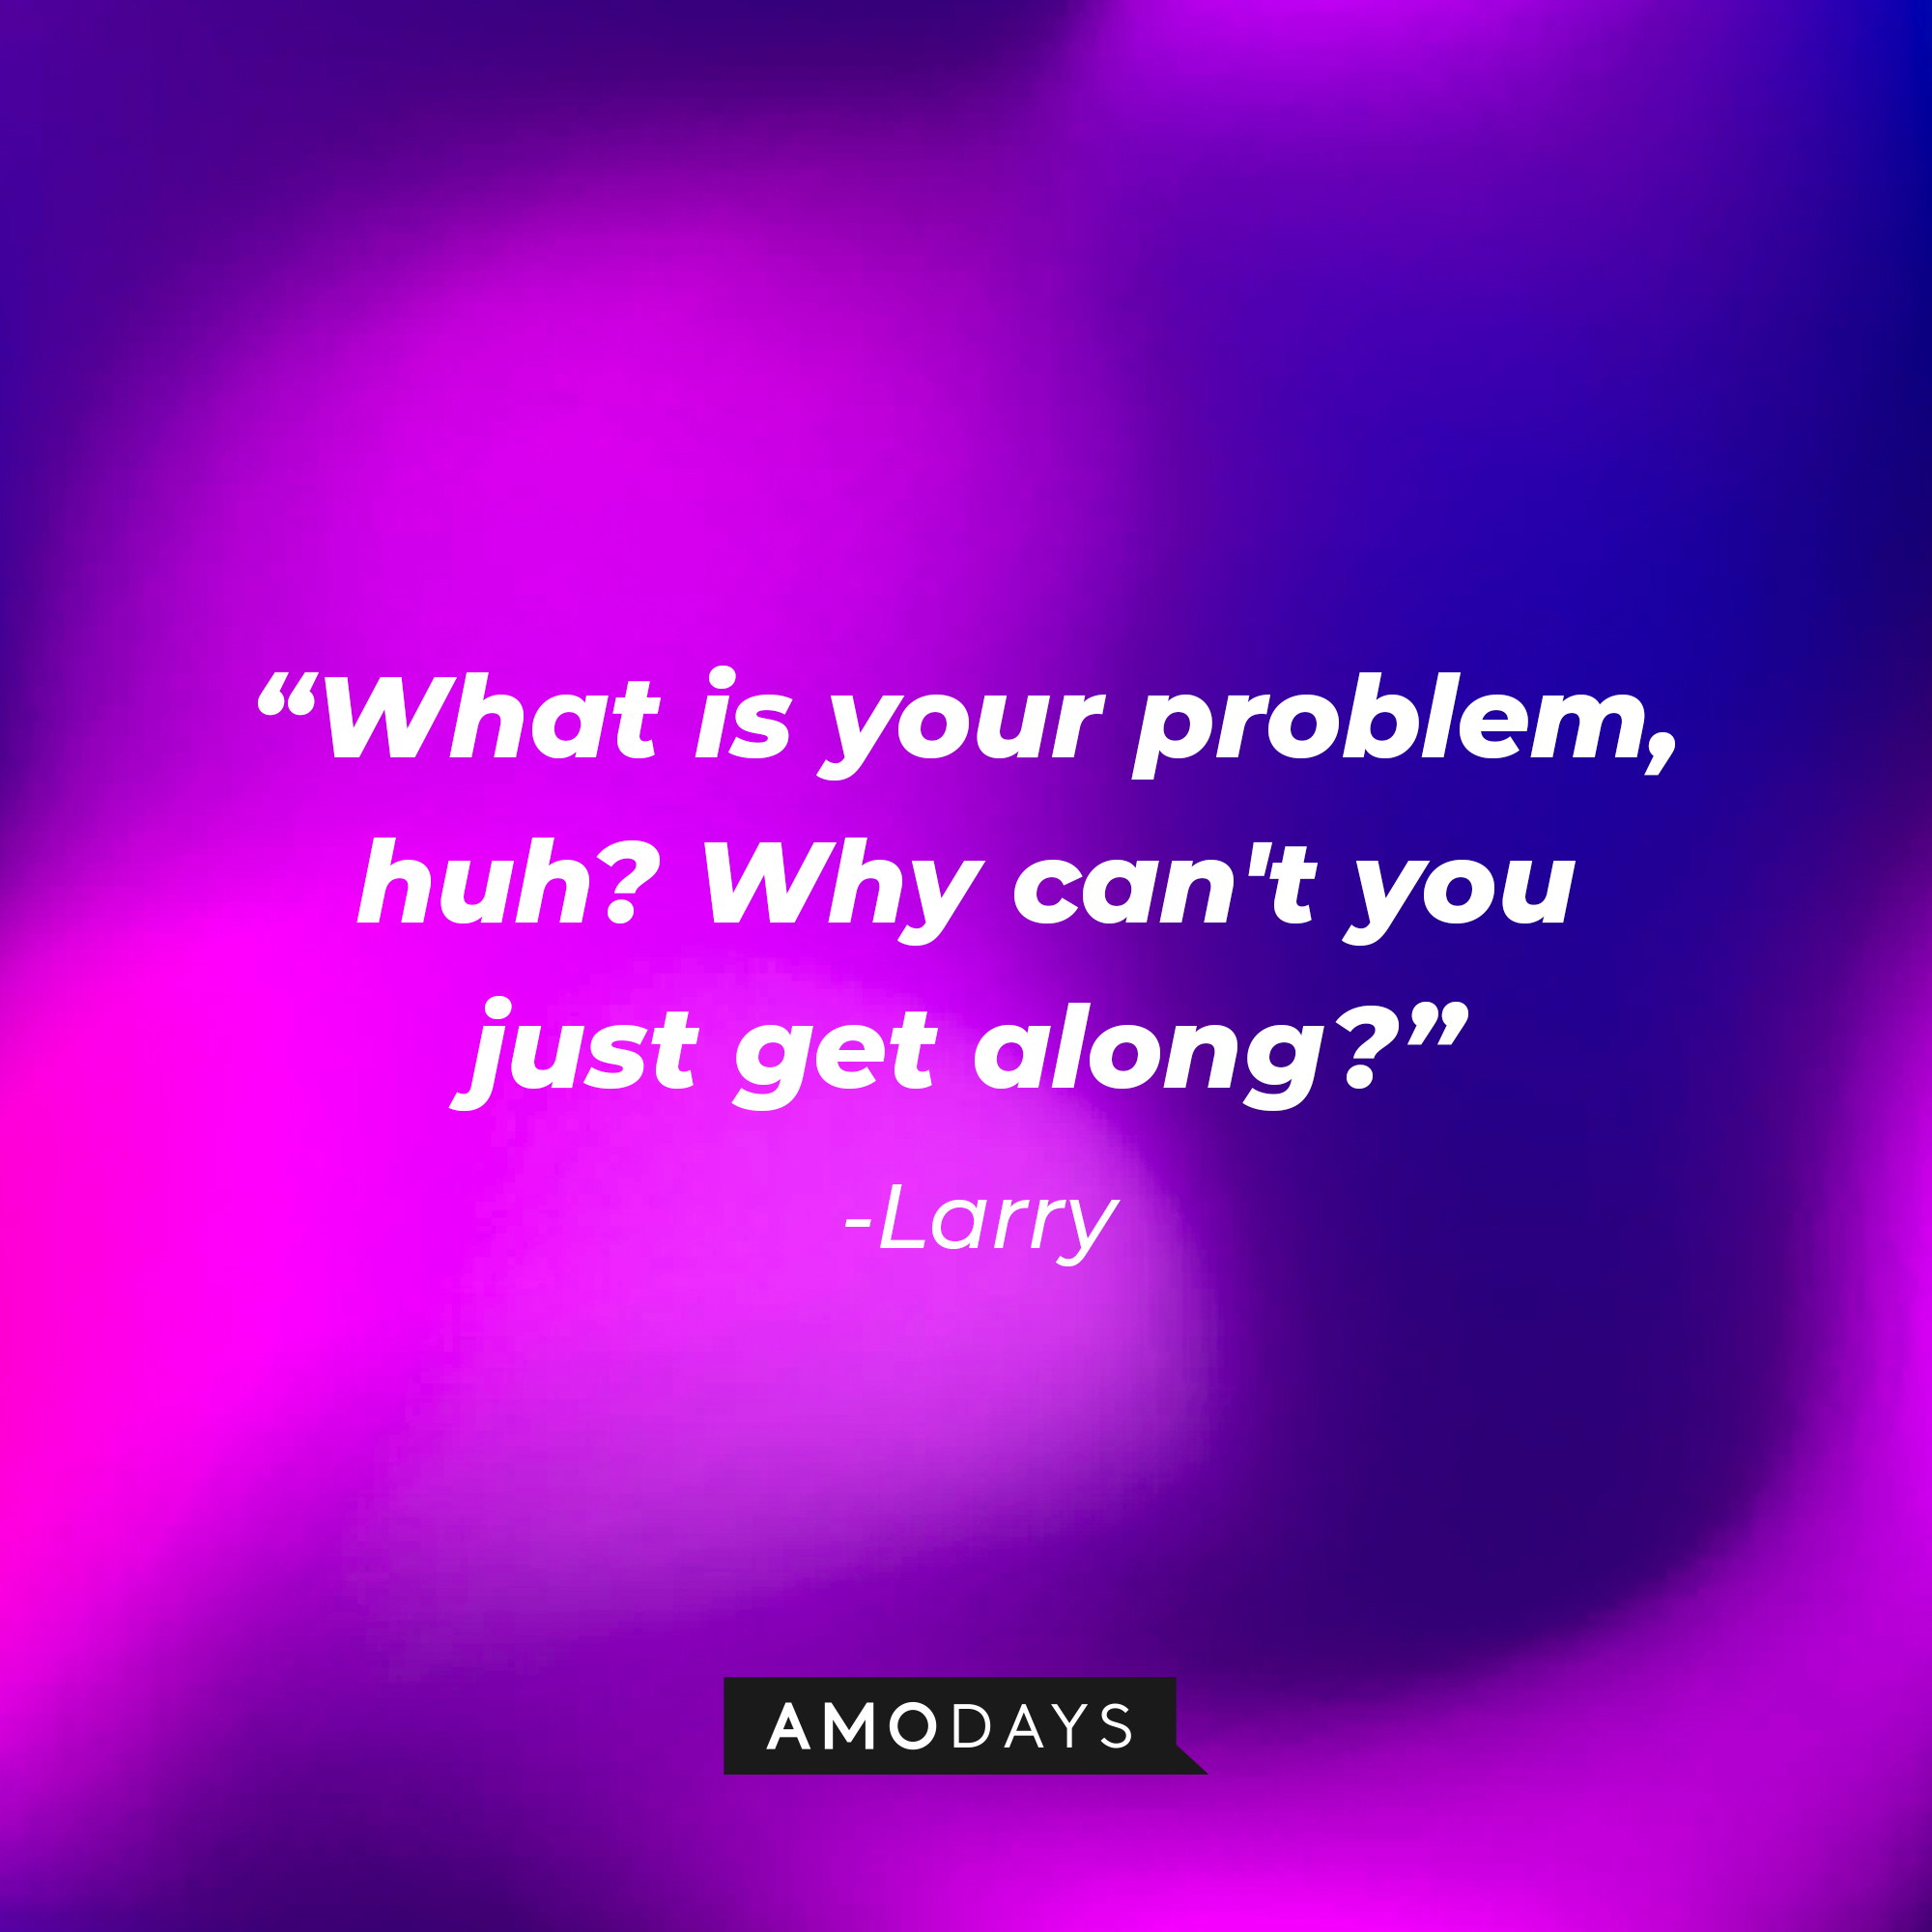 Larry's quote: “What is your problem, huh? Why can't you just get along?” | Source: Amodays